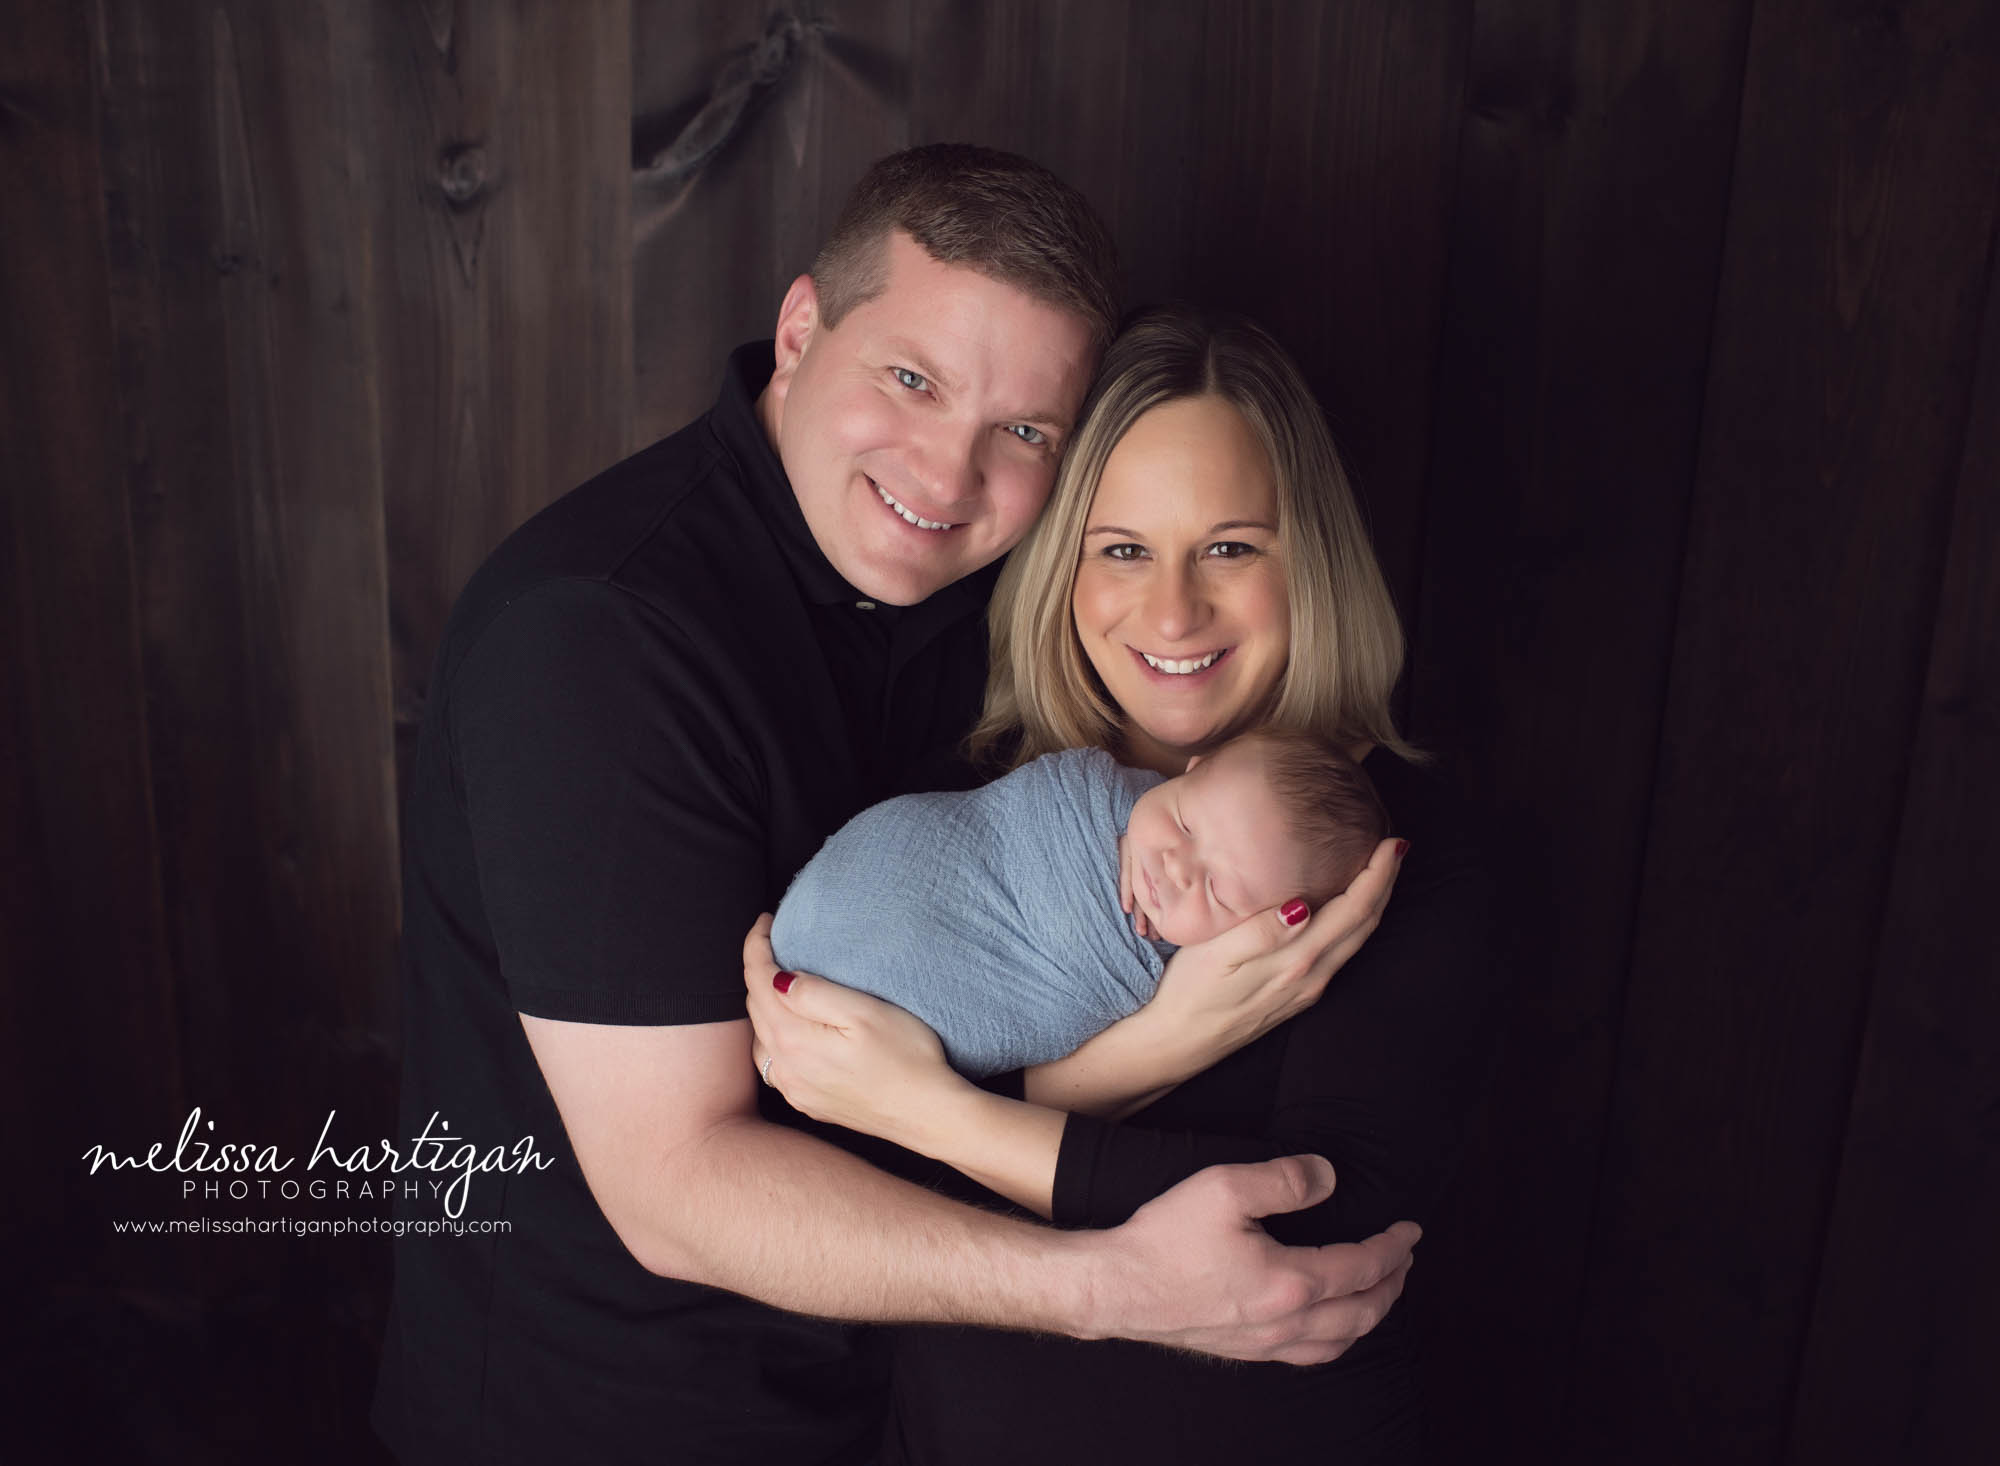 Melissa Hartigan Photography Newborn Photographer Connecticut baby boy wrapped in blue sleeping held by parents